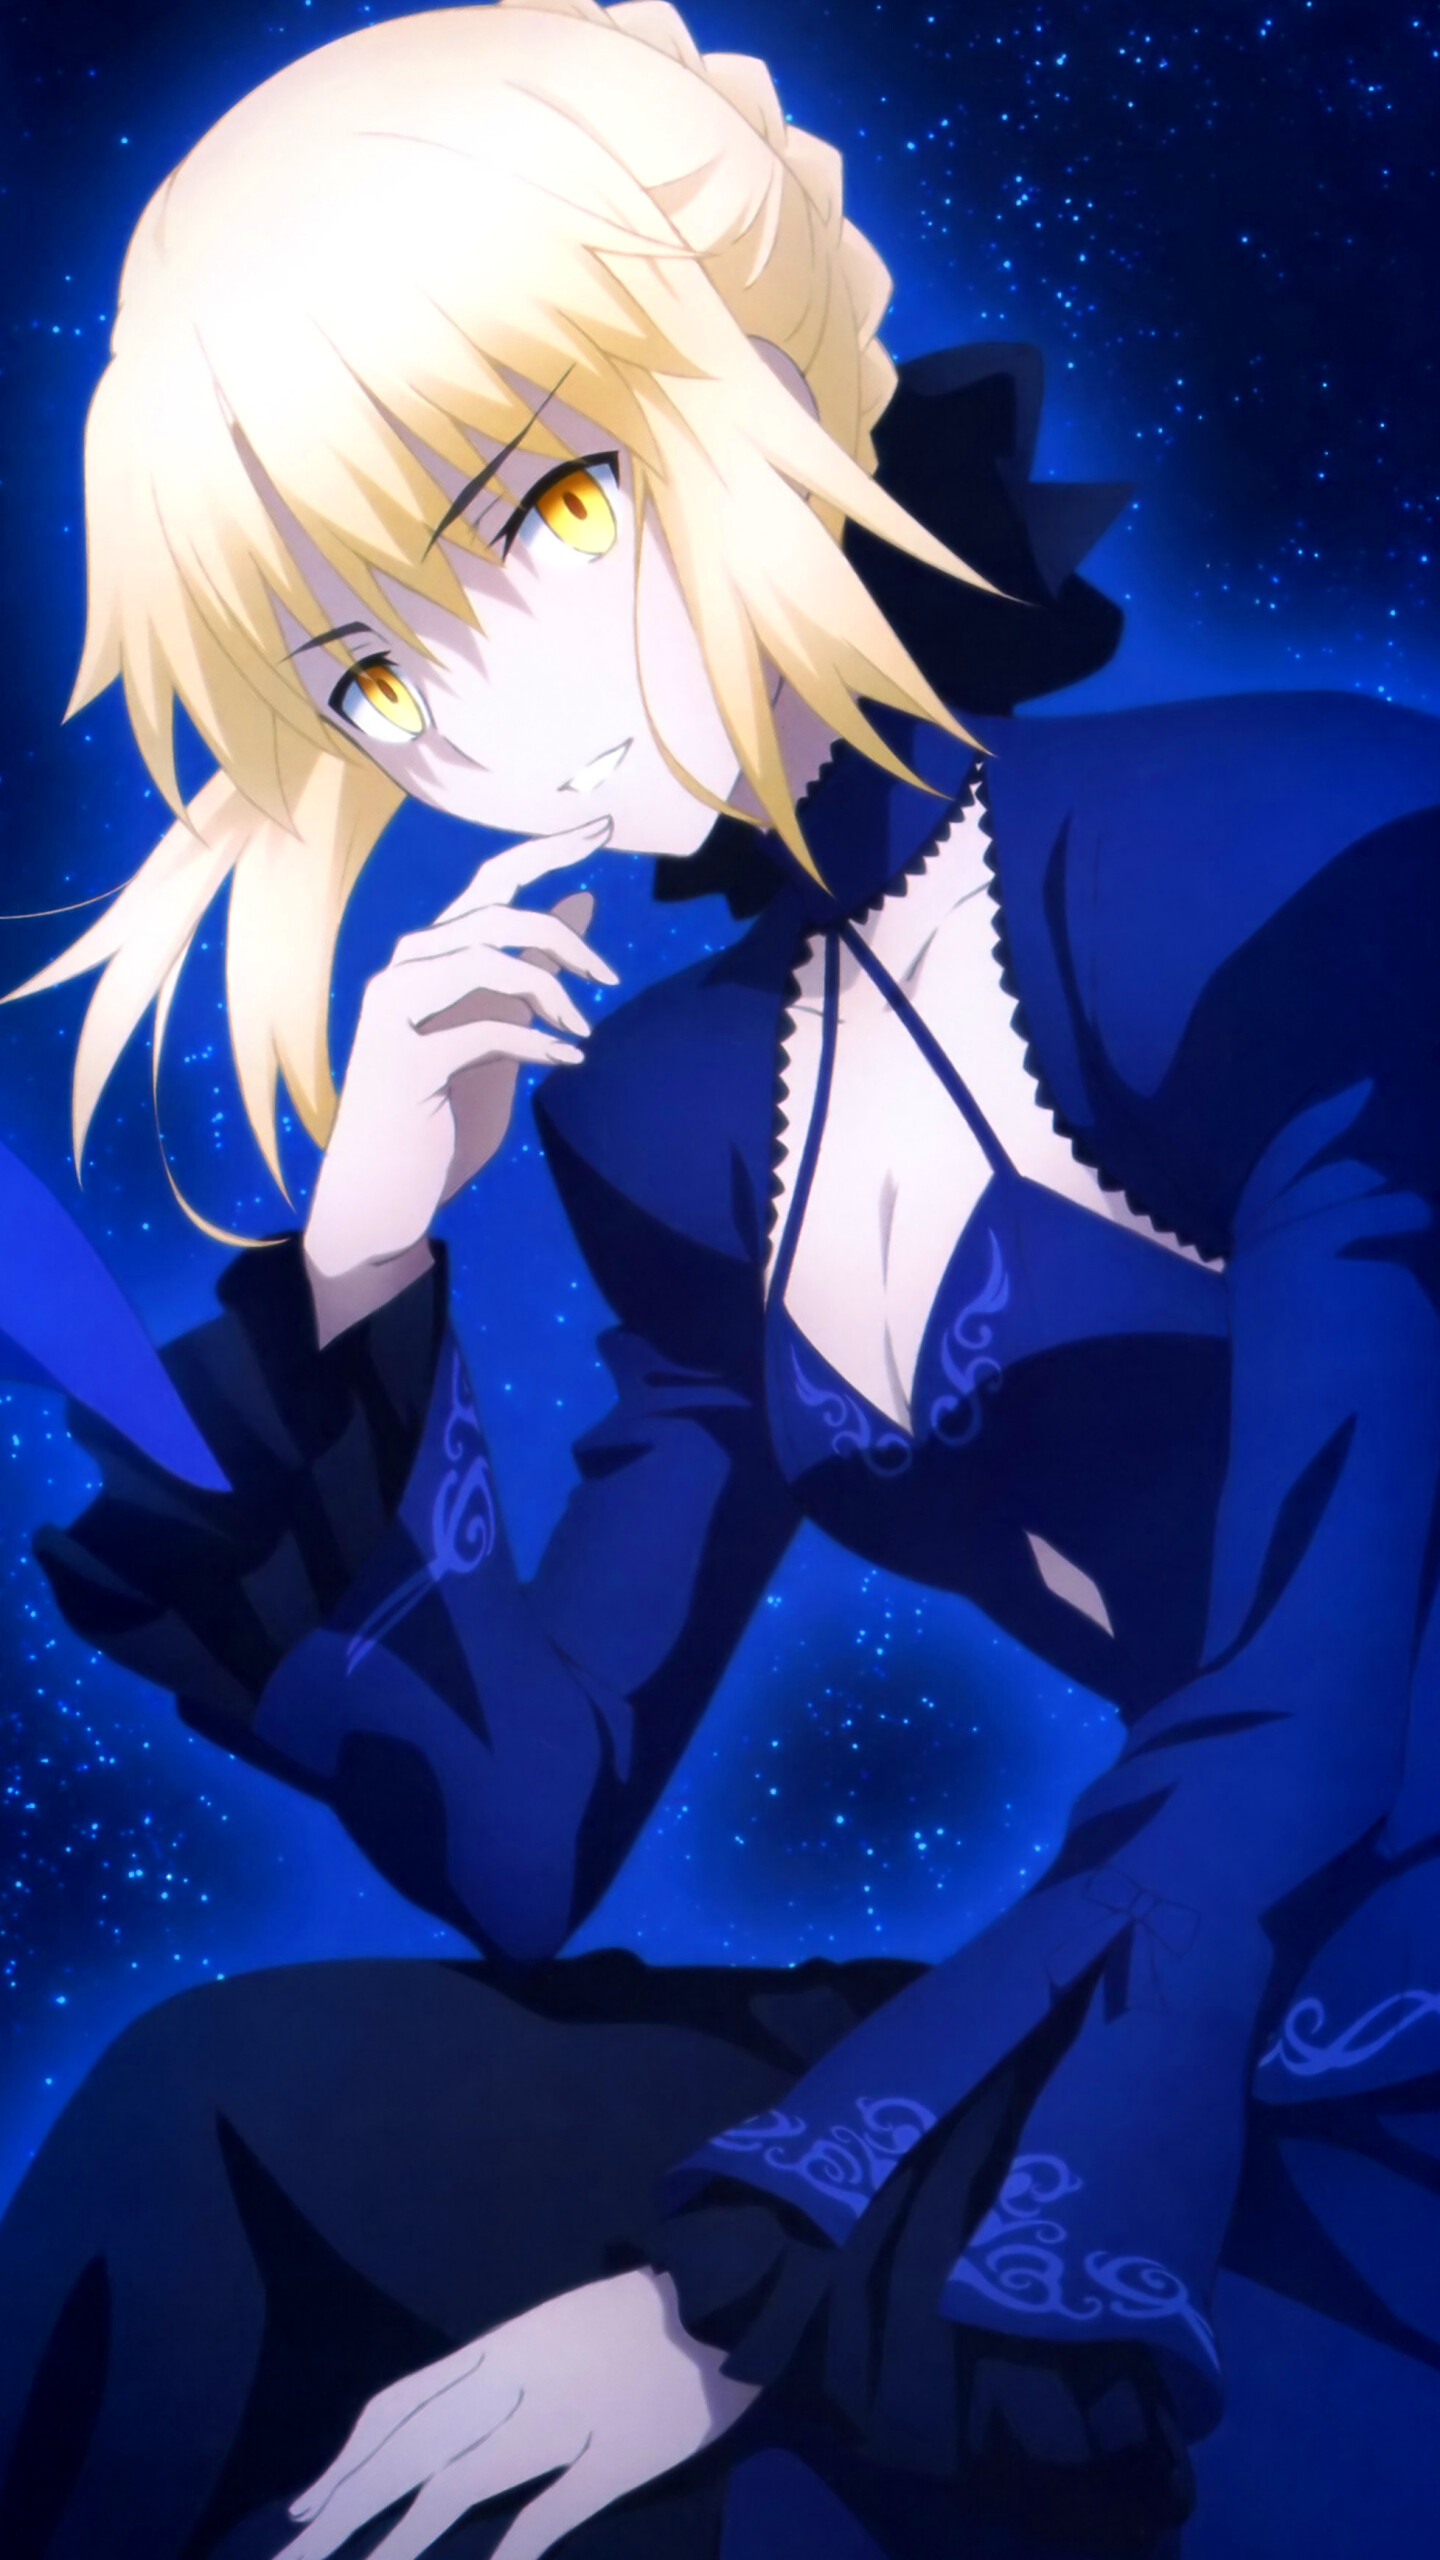 Fate/stay night: Heaven's Feel: Saber, An agile and mighty warrior. 1440x2560 HD Wallpaper.